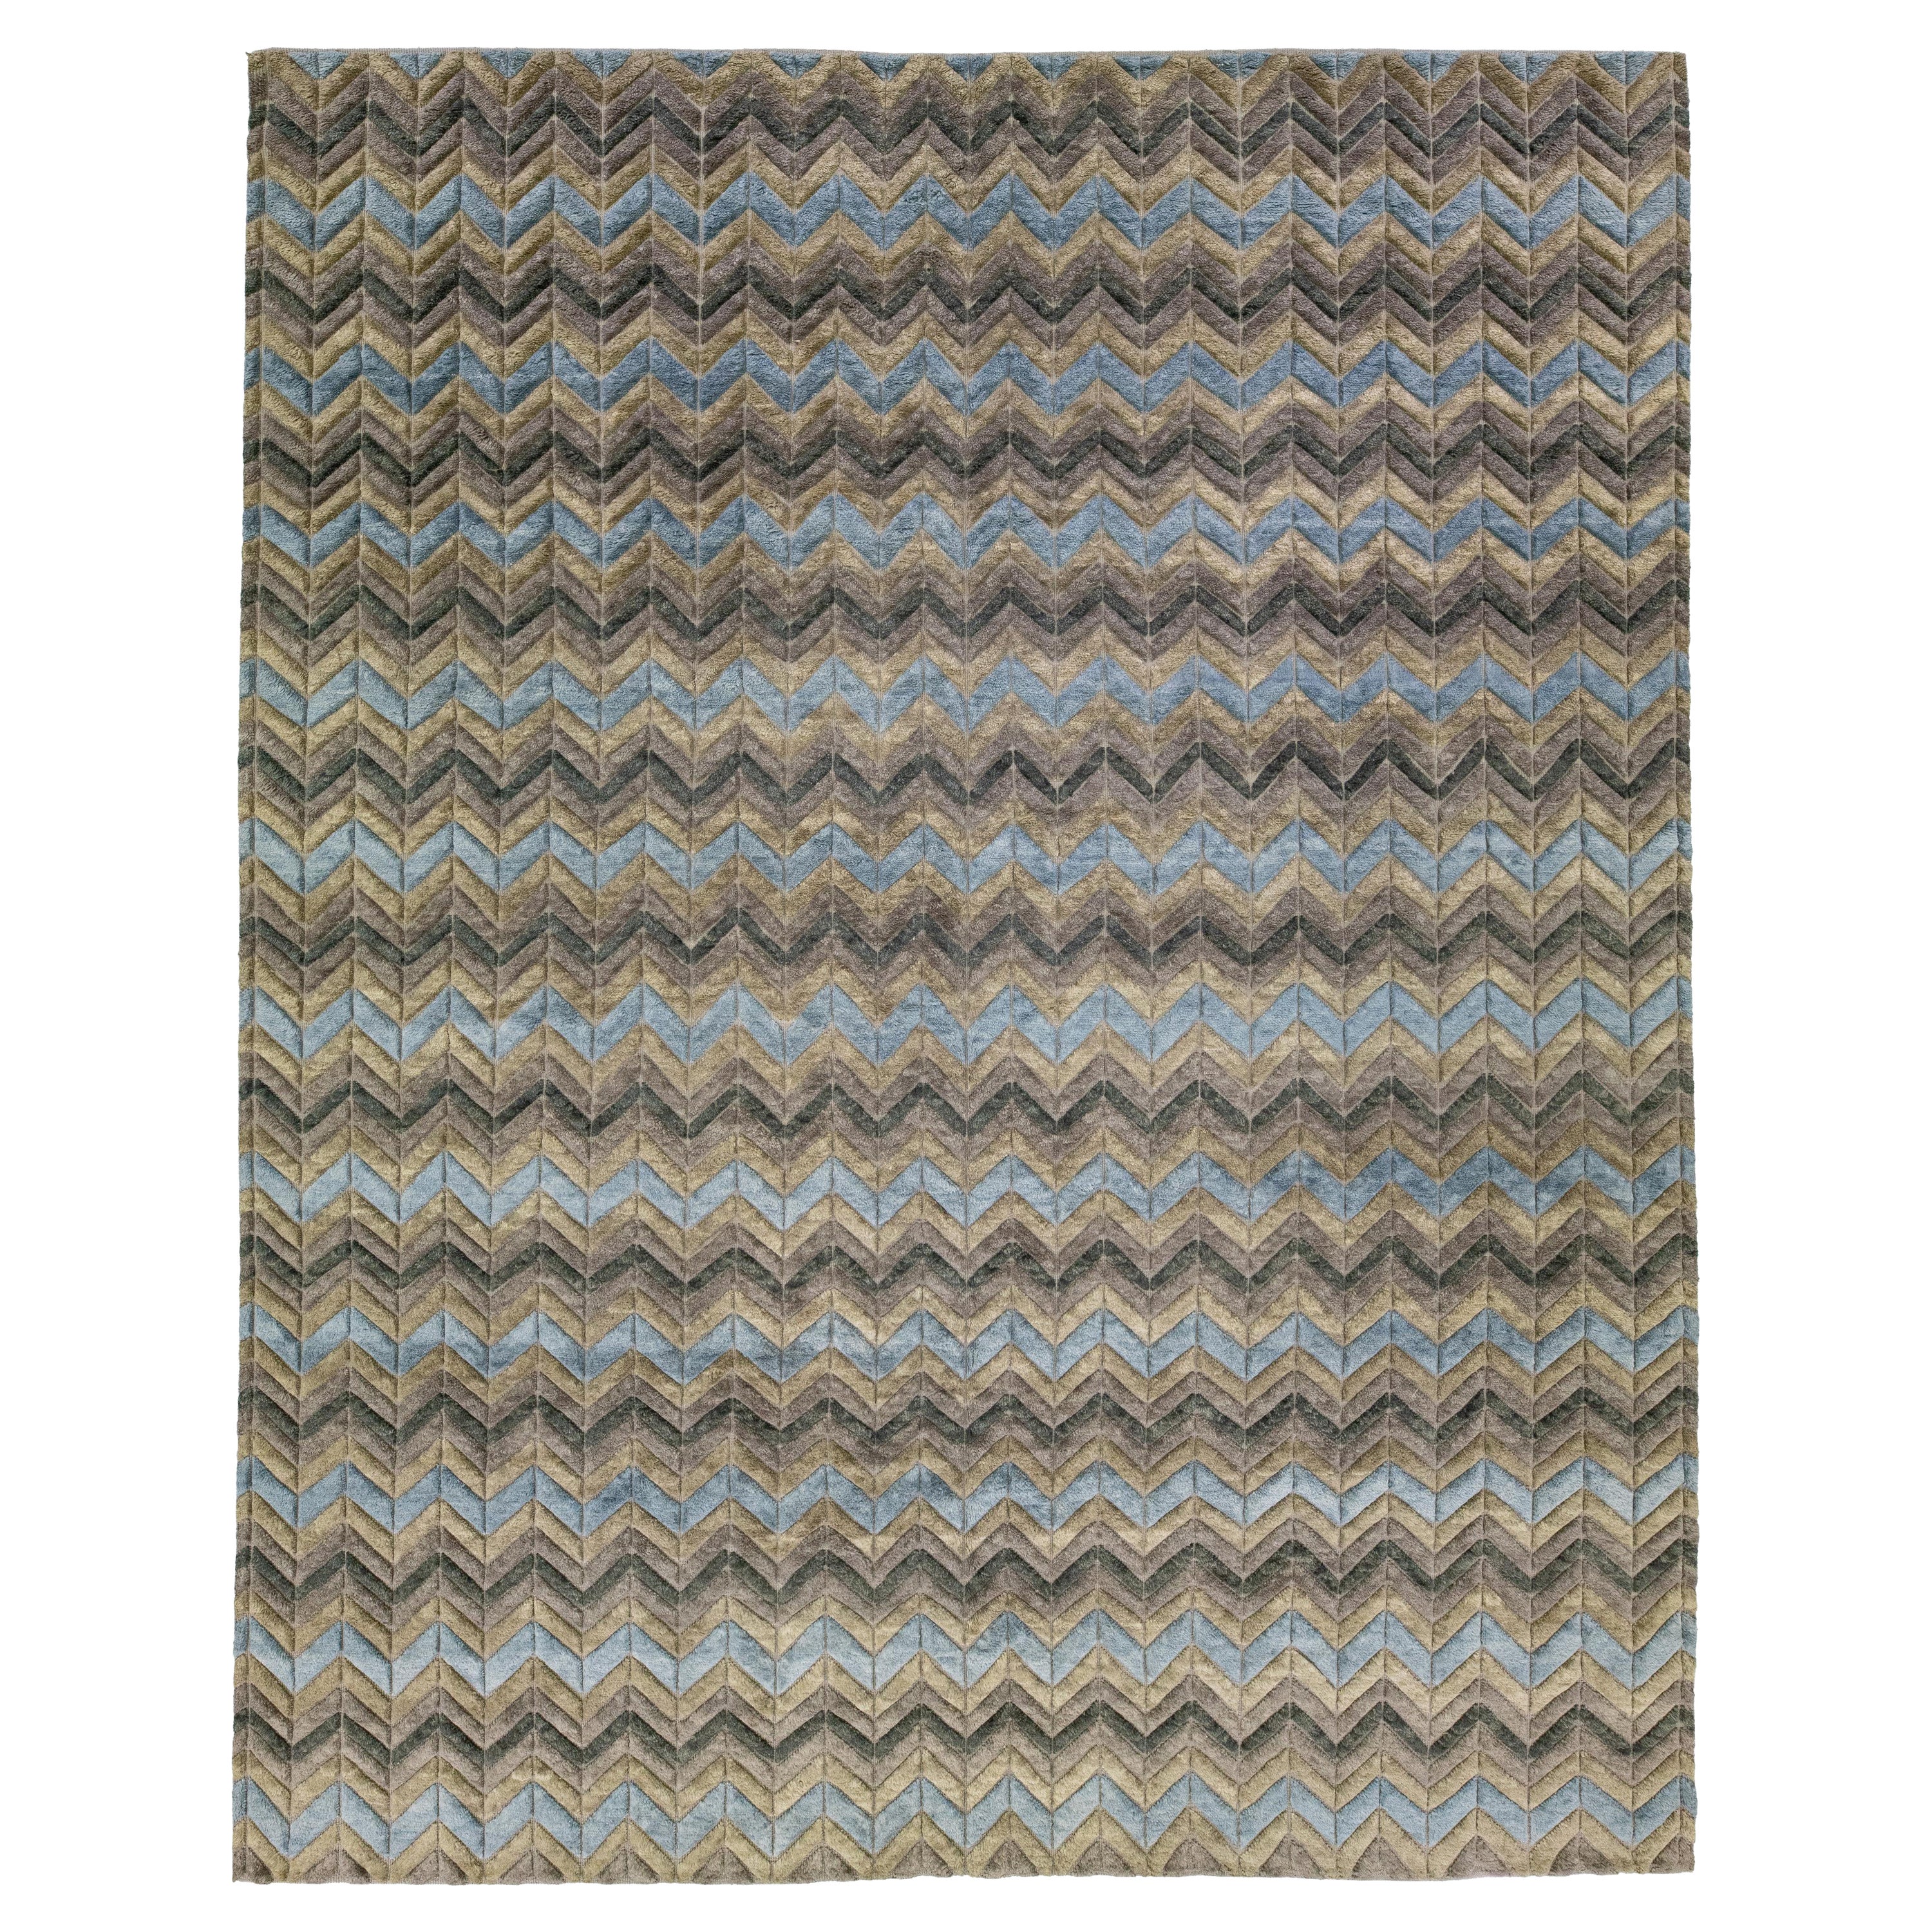 Contemporary Moroccan Style Wool Rug With Geometric Motif In Earthy Shades For Sale